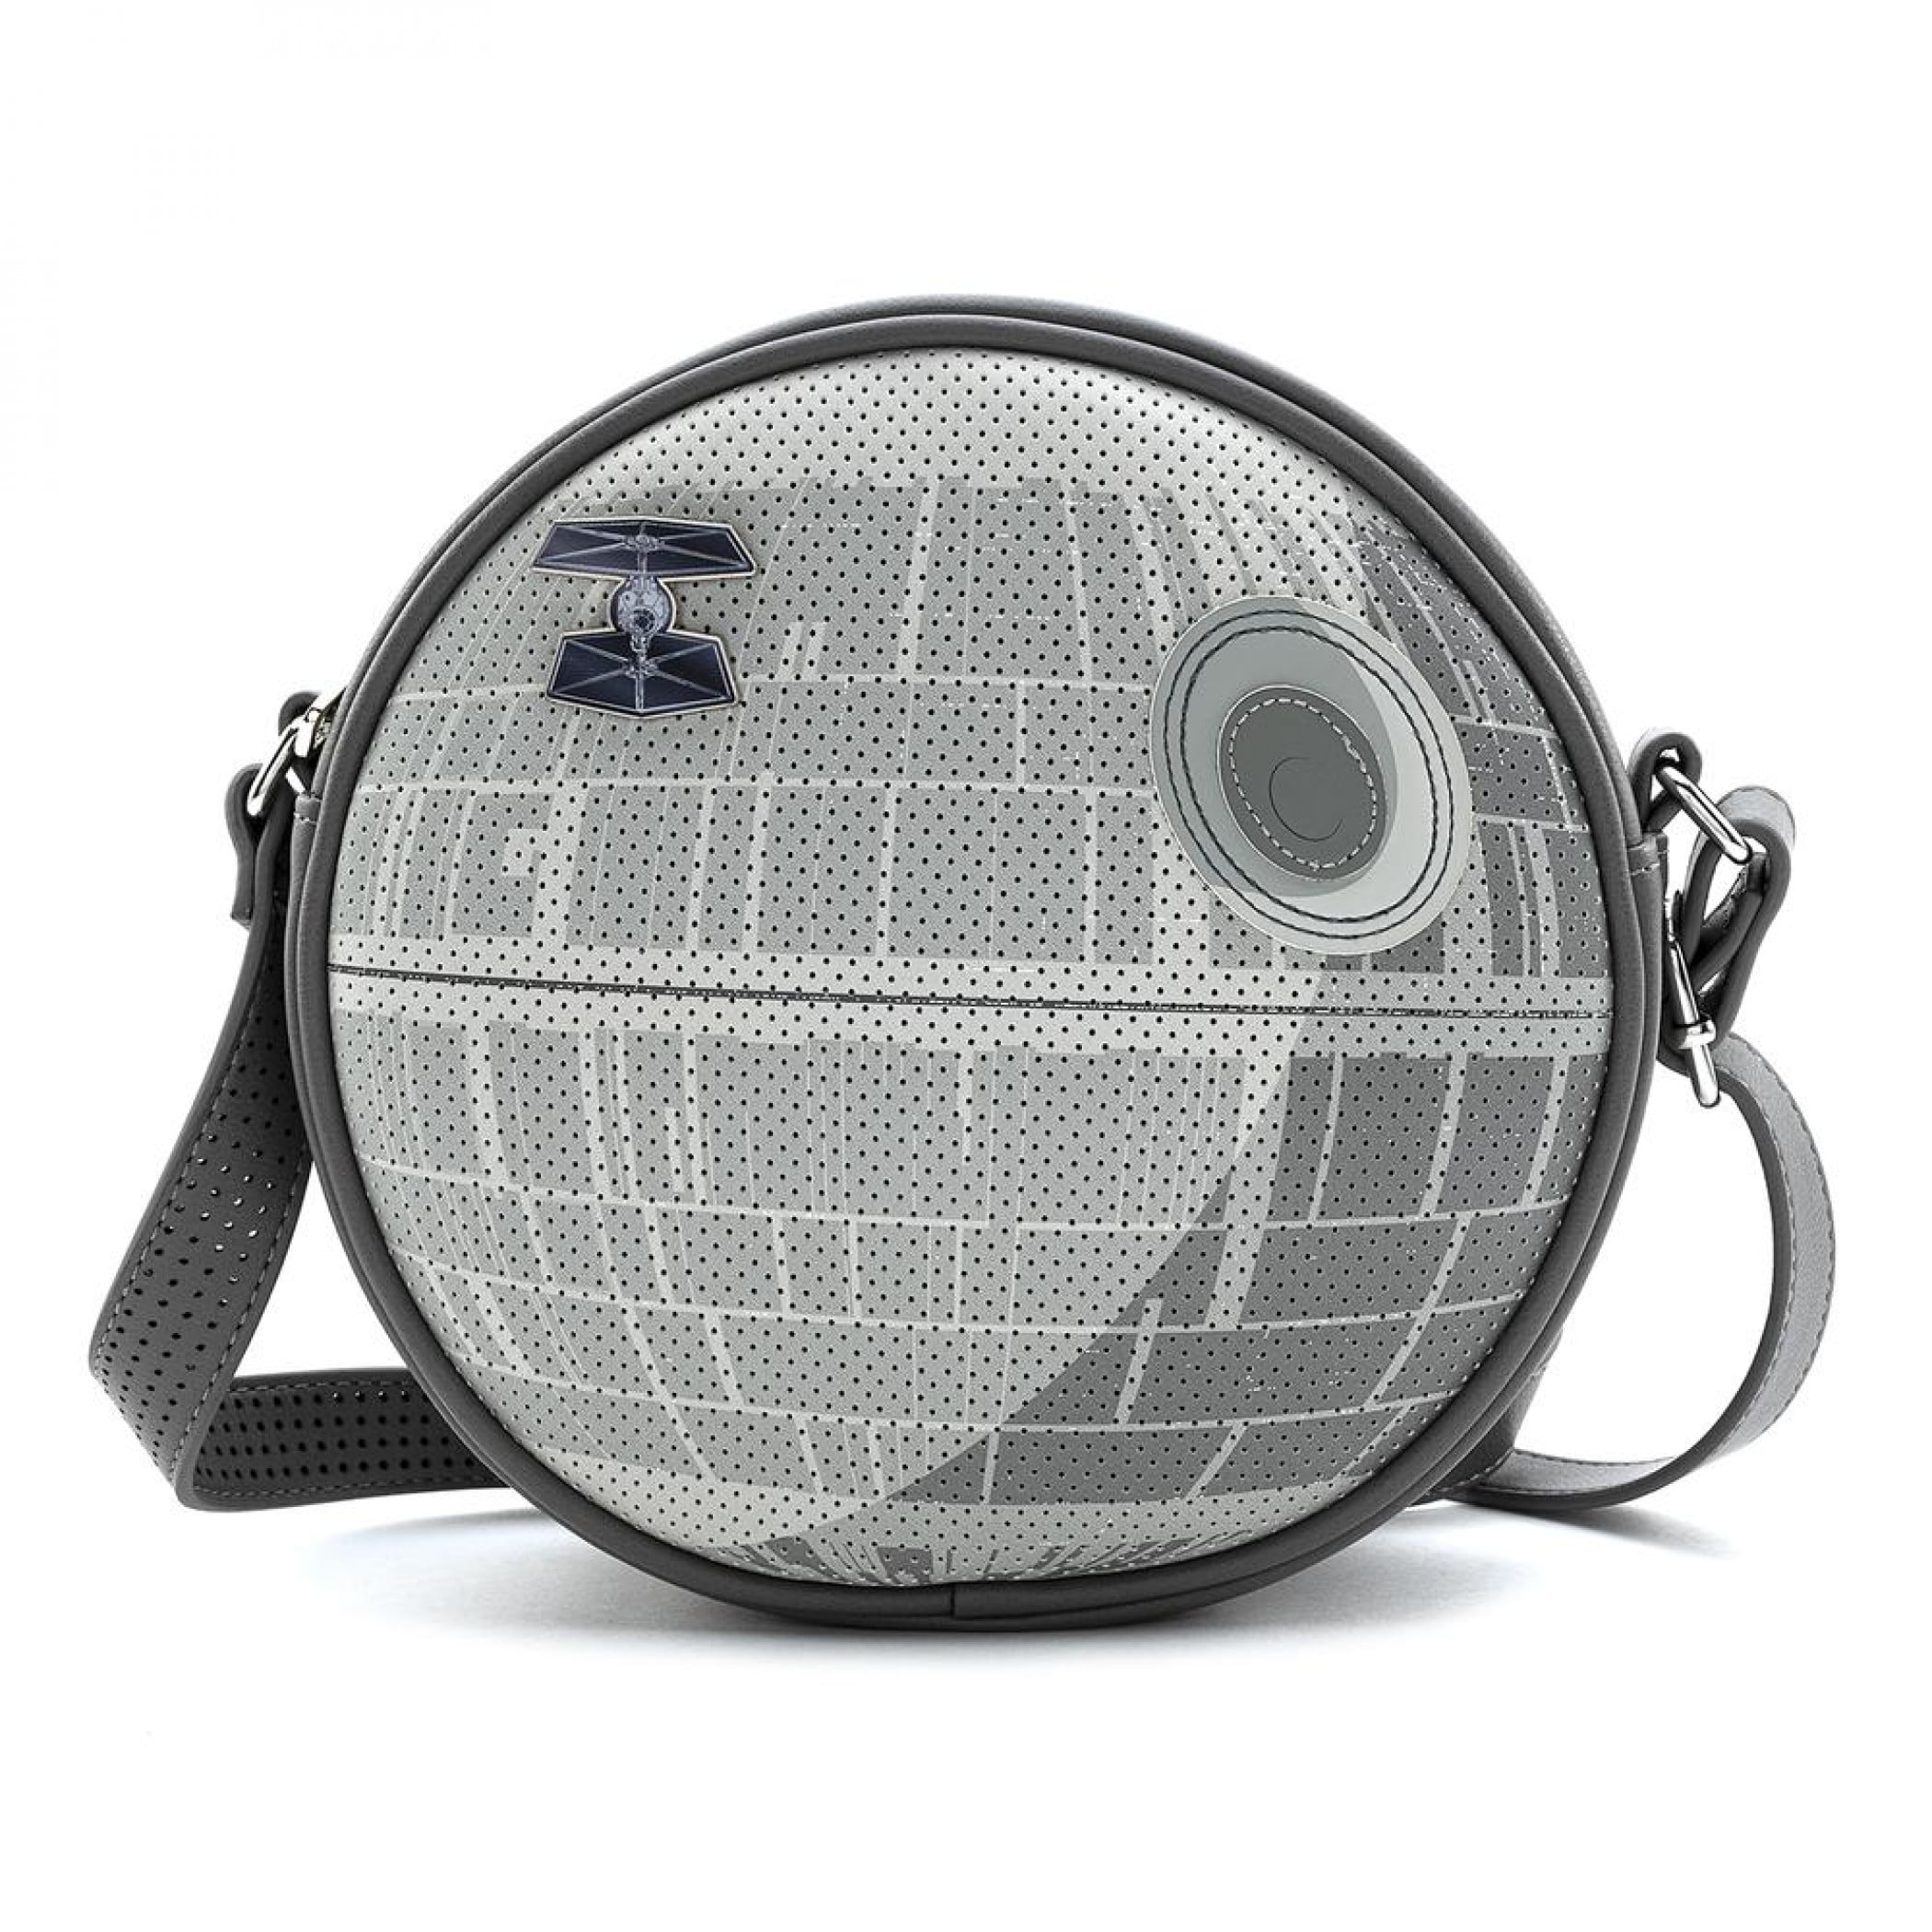 BRAND NEW OFFICIAL STAR WARS DEATH STAR 3D STYLED COIN POCKET/ PURSE 